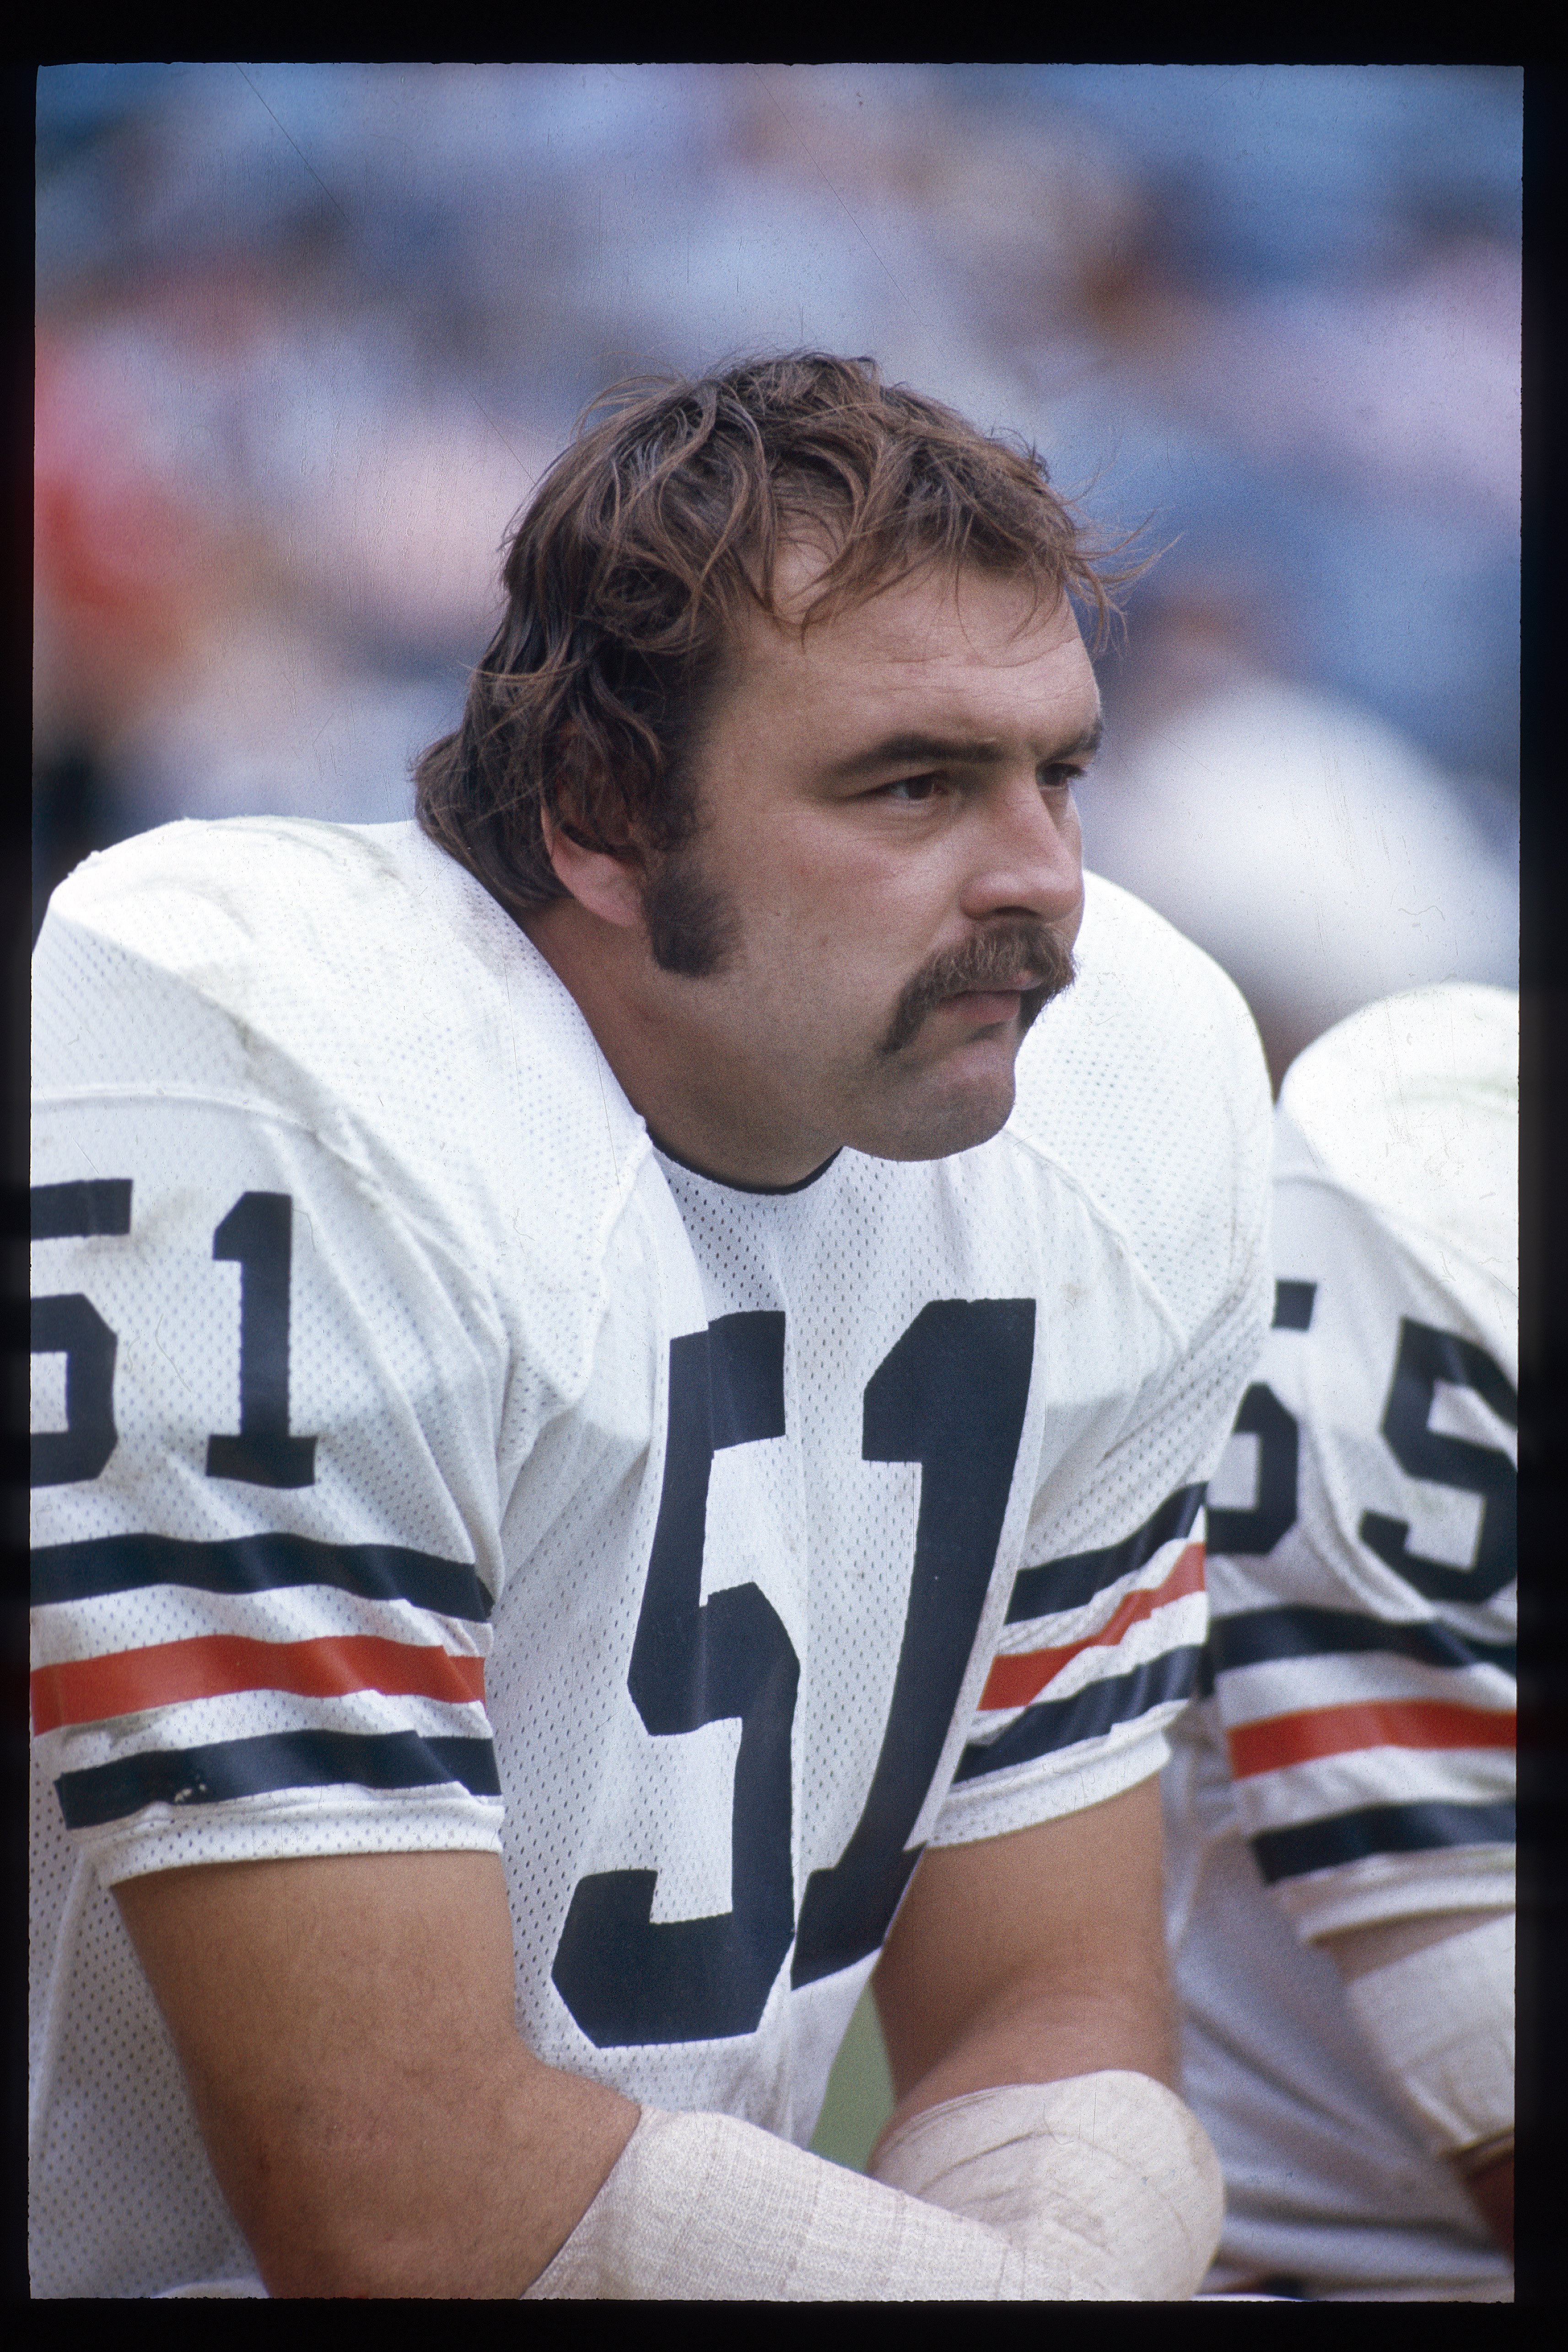 Dick Butkus during NFL football game at Lambeau frield on January 1, 1965 in Green Bay, Wisconsin. | Sources: Getty Images